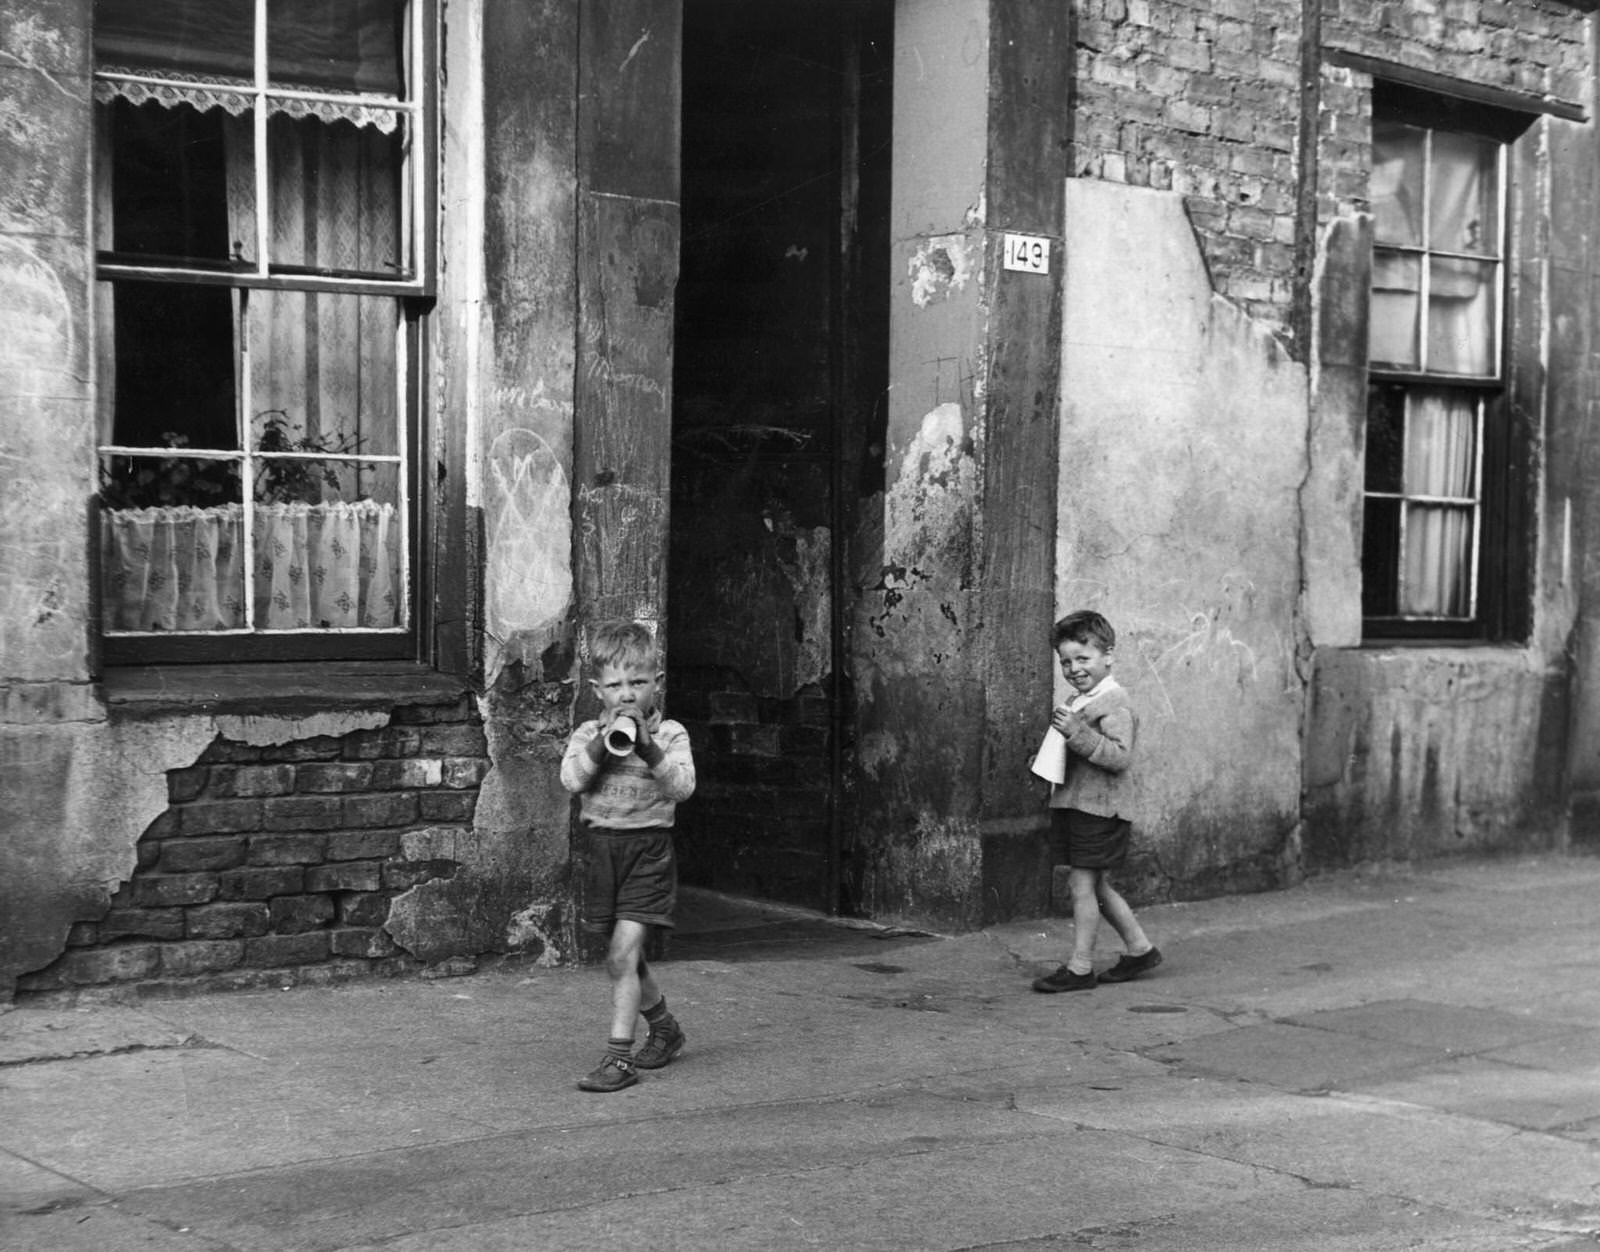 Two young boys playing outside in the Gorbals district of Glasgow, which was described as having the worst slums in Europe, 1960